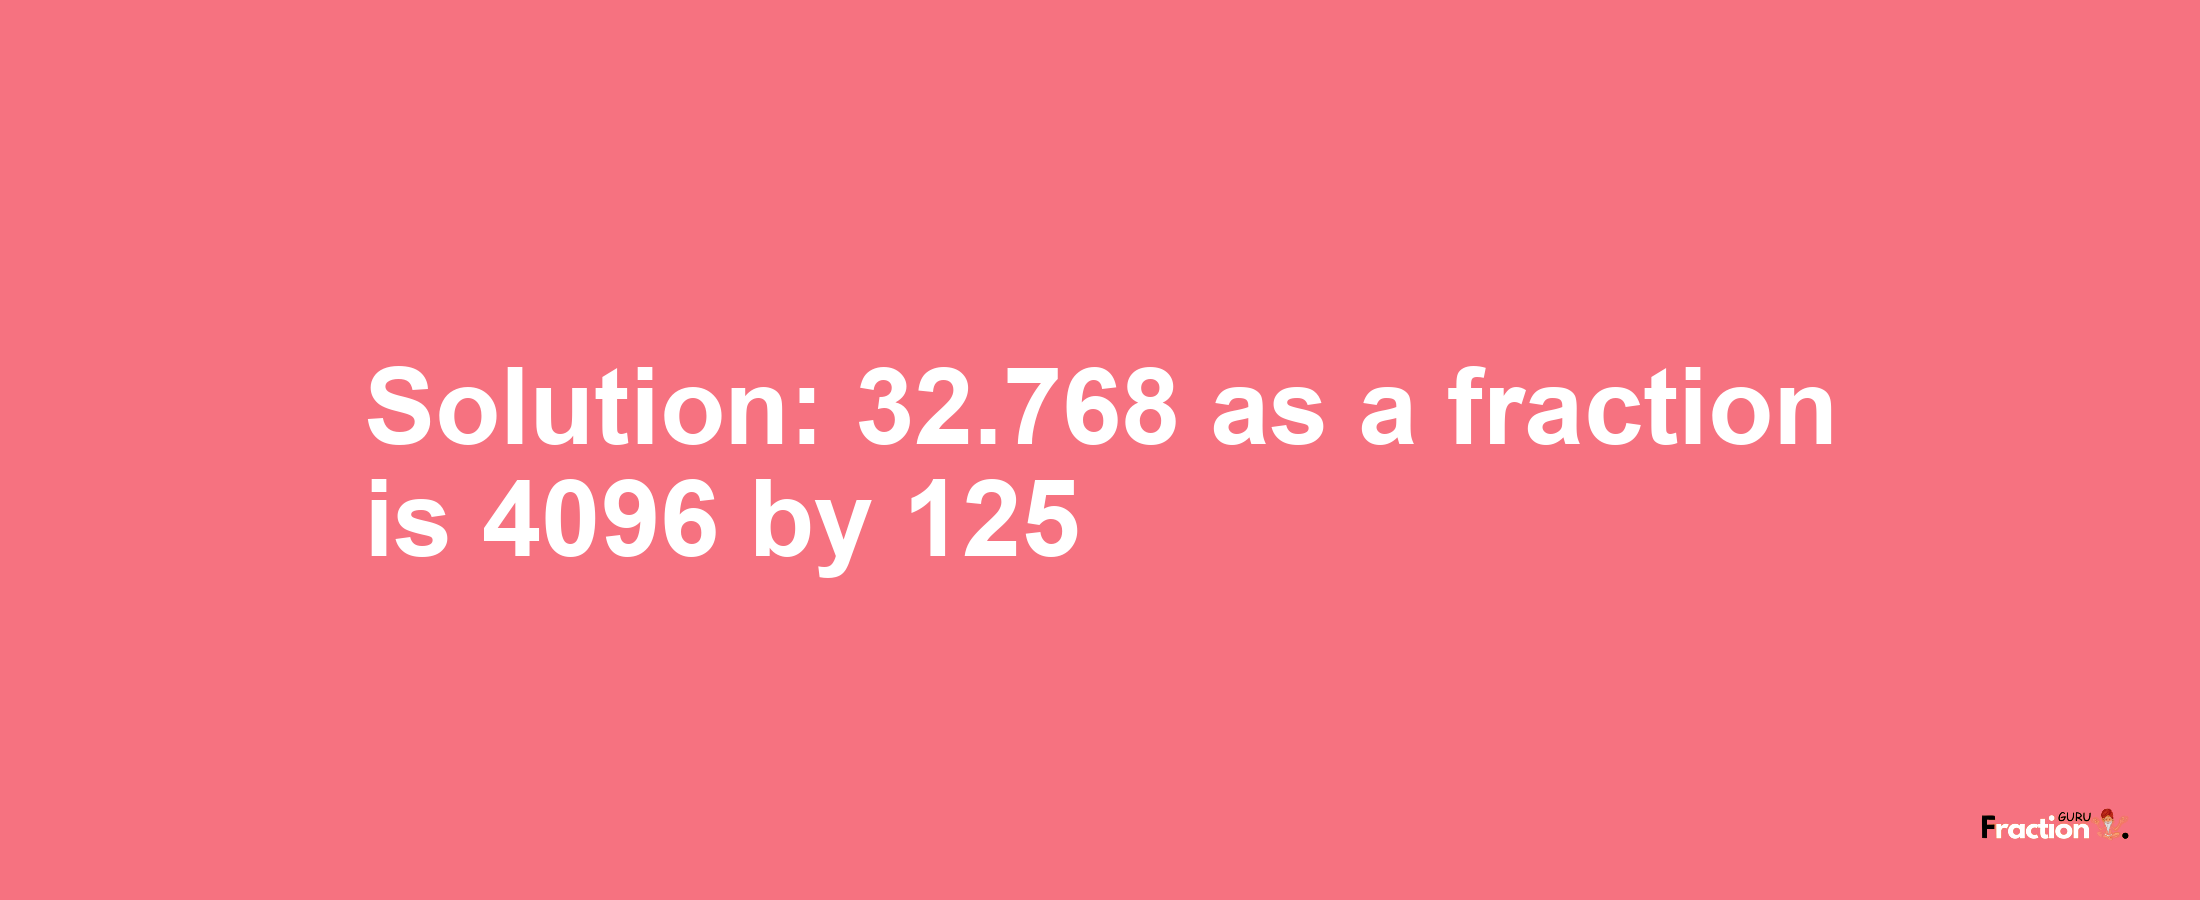 Solution:32.768 as a fraction is 4096/125